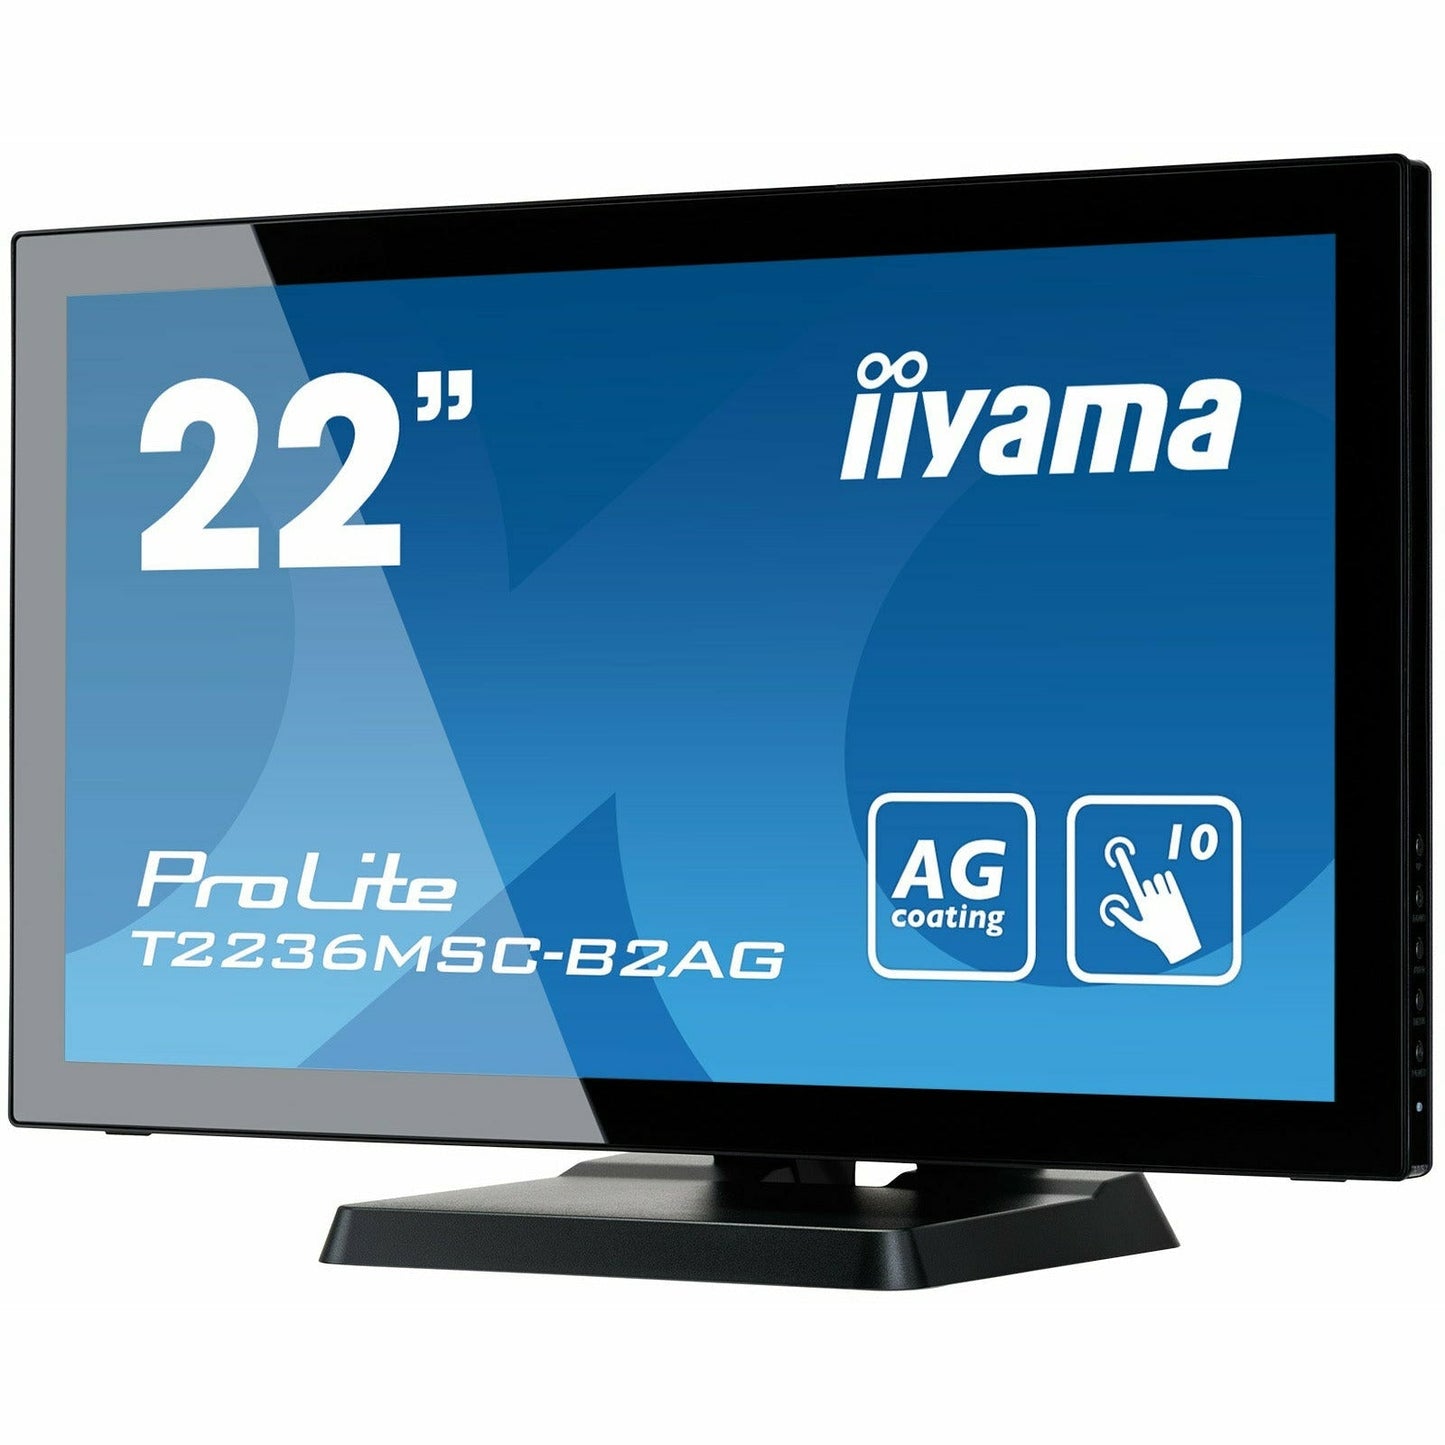 Steel Blue iiyama ProLite T2236MSC-B2AG 22" 10 point Touch Screen with Edge-To-Edge Glass and Anti Glare Coating